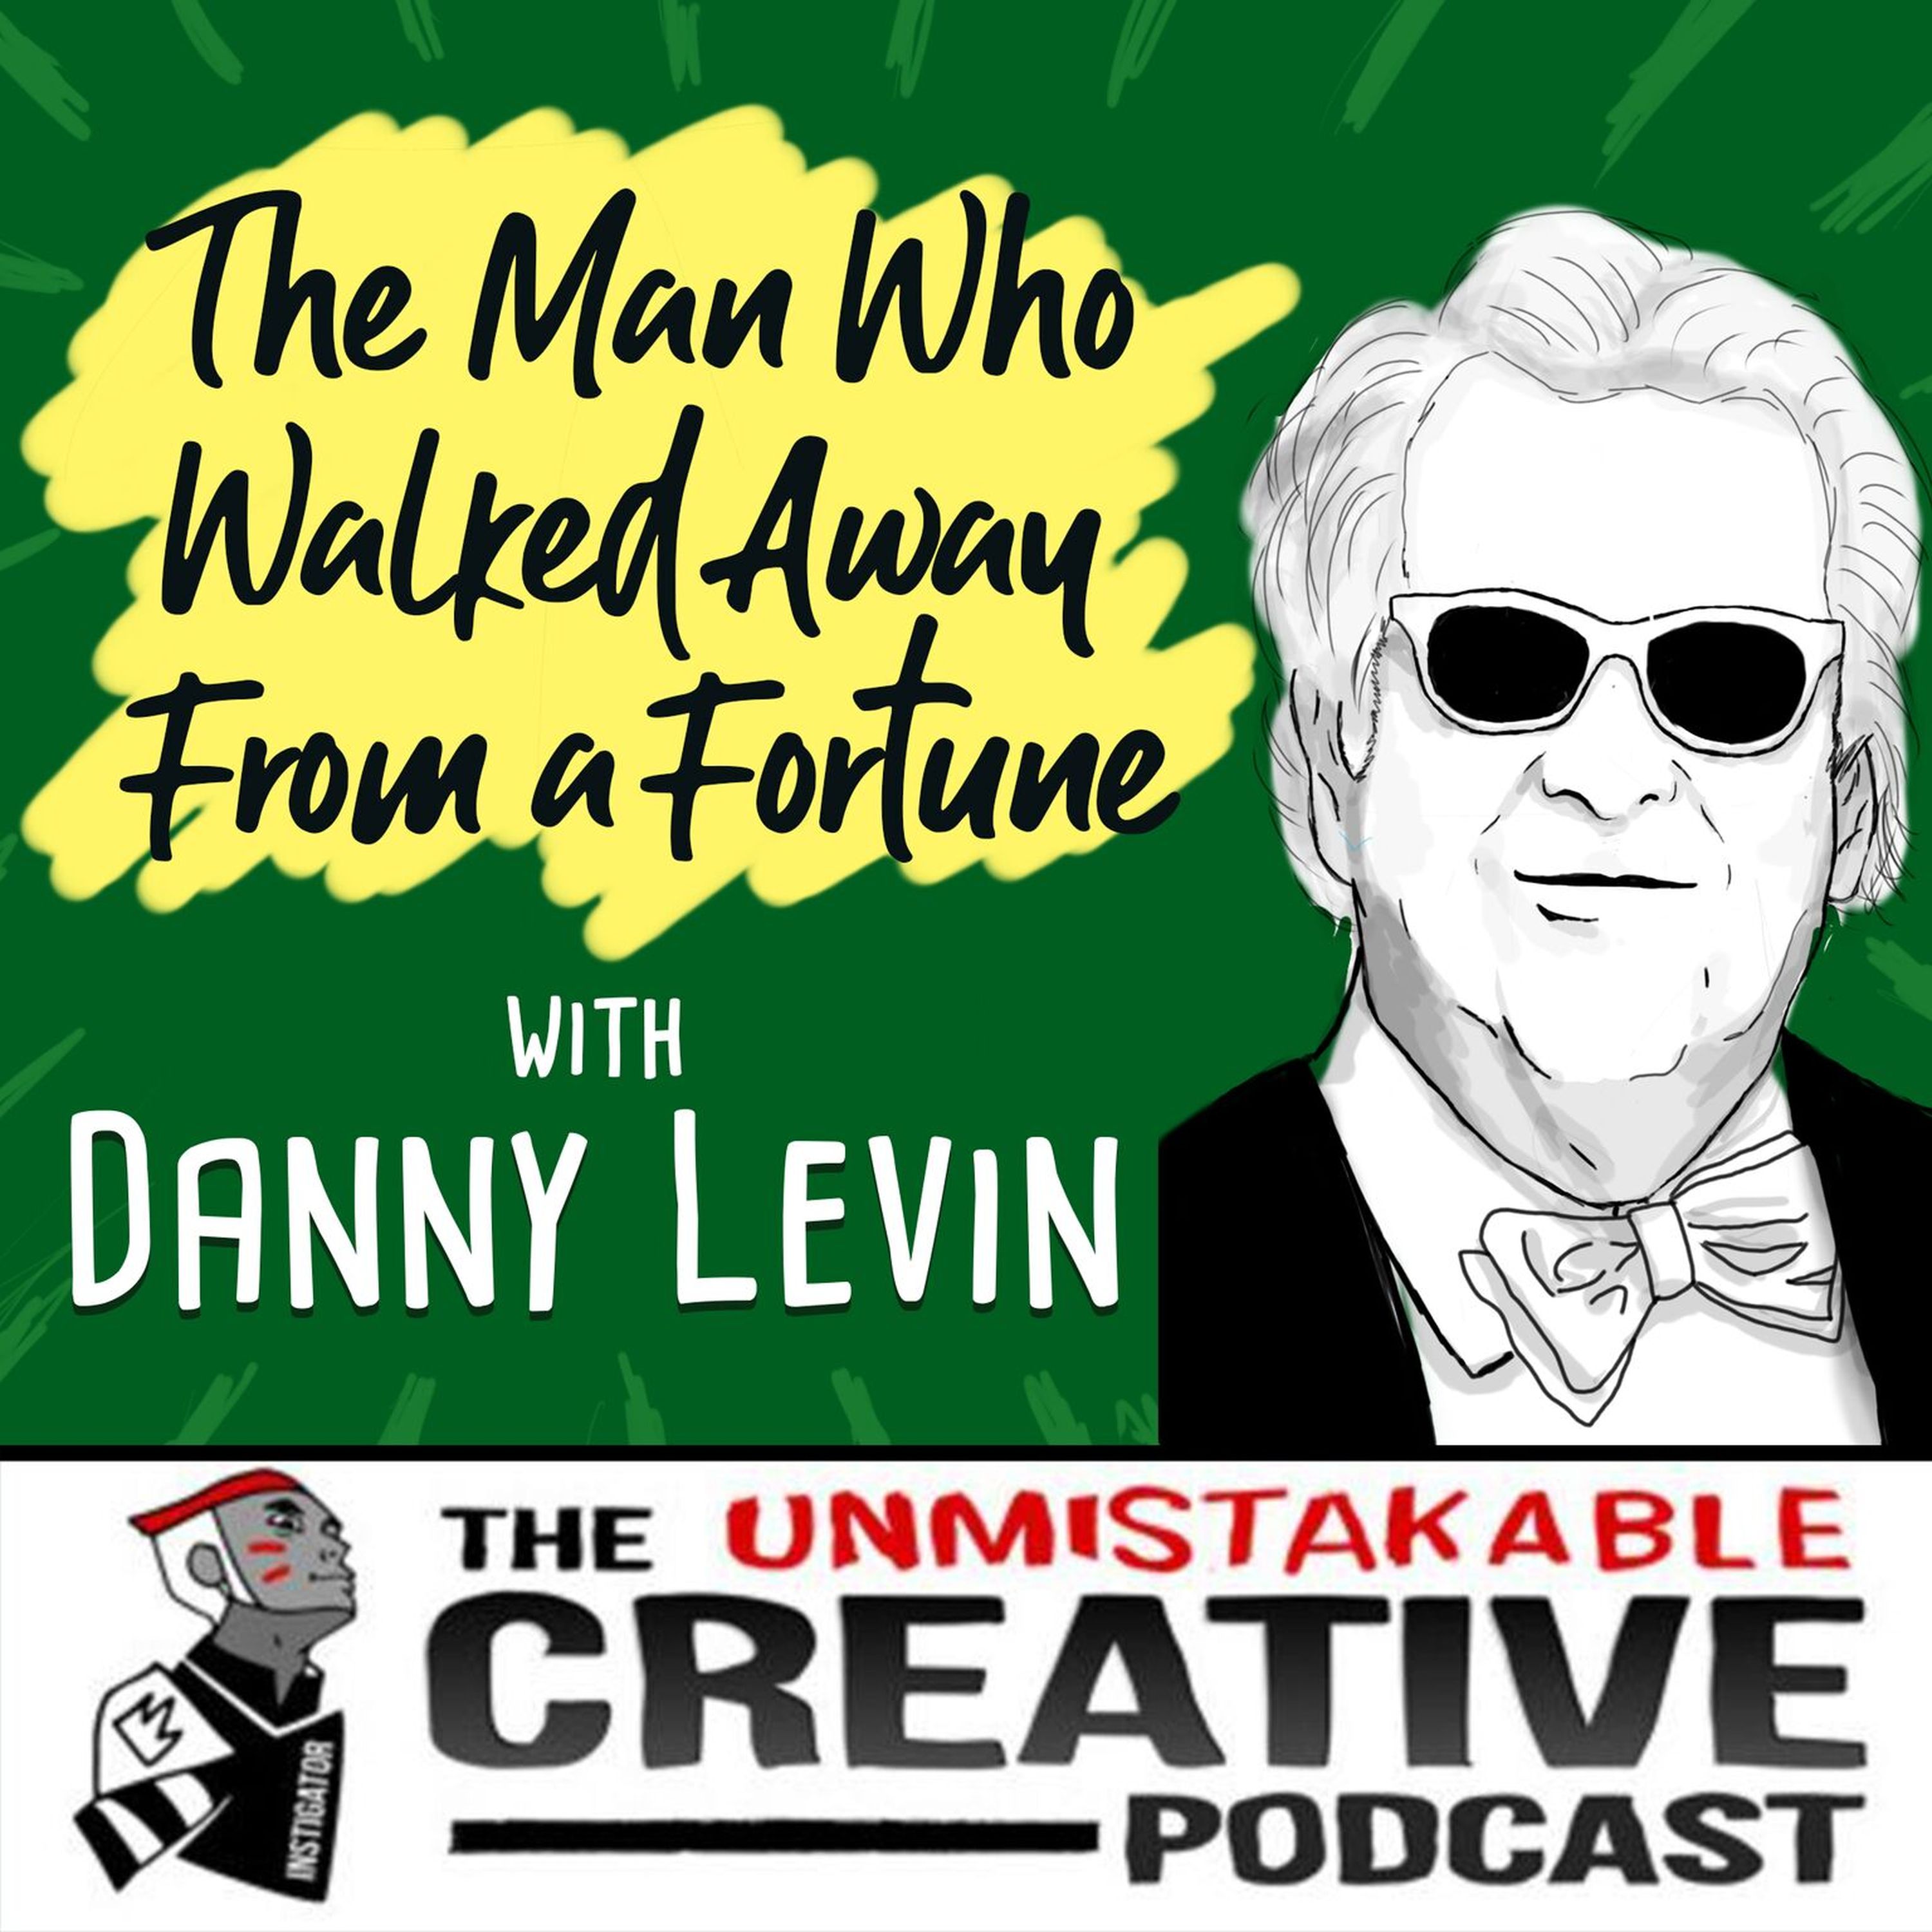 Best of 2019: Daniel Levin: The Man Who Walked Away From a Fortune Image